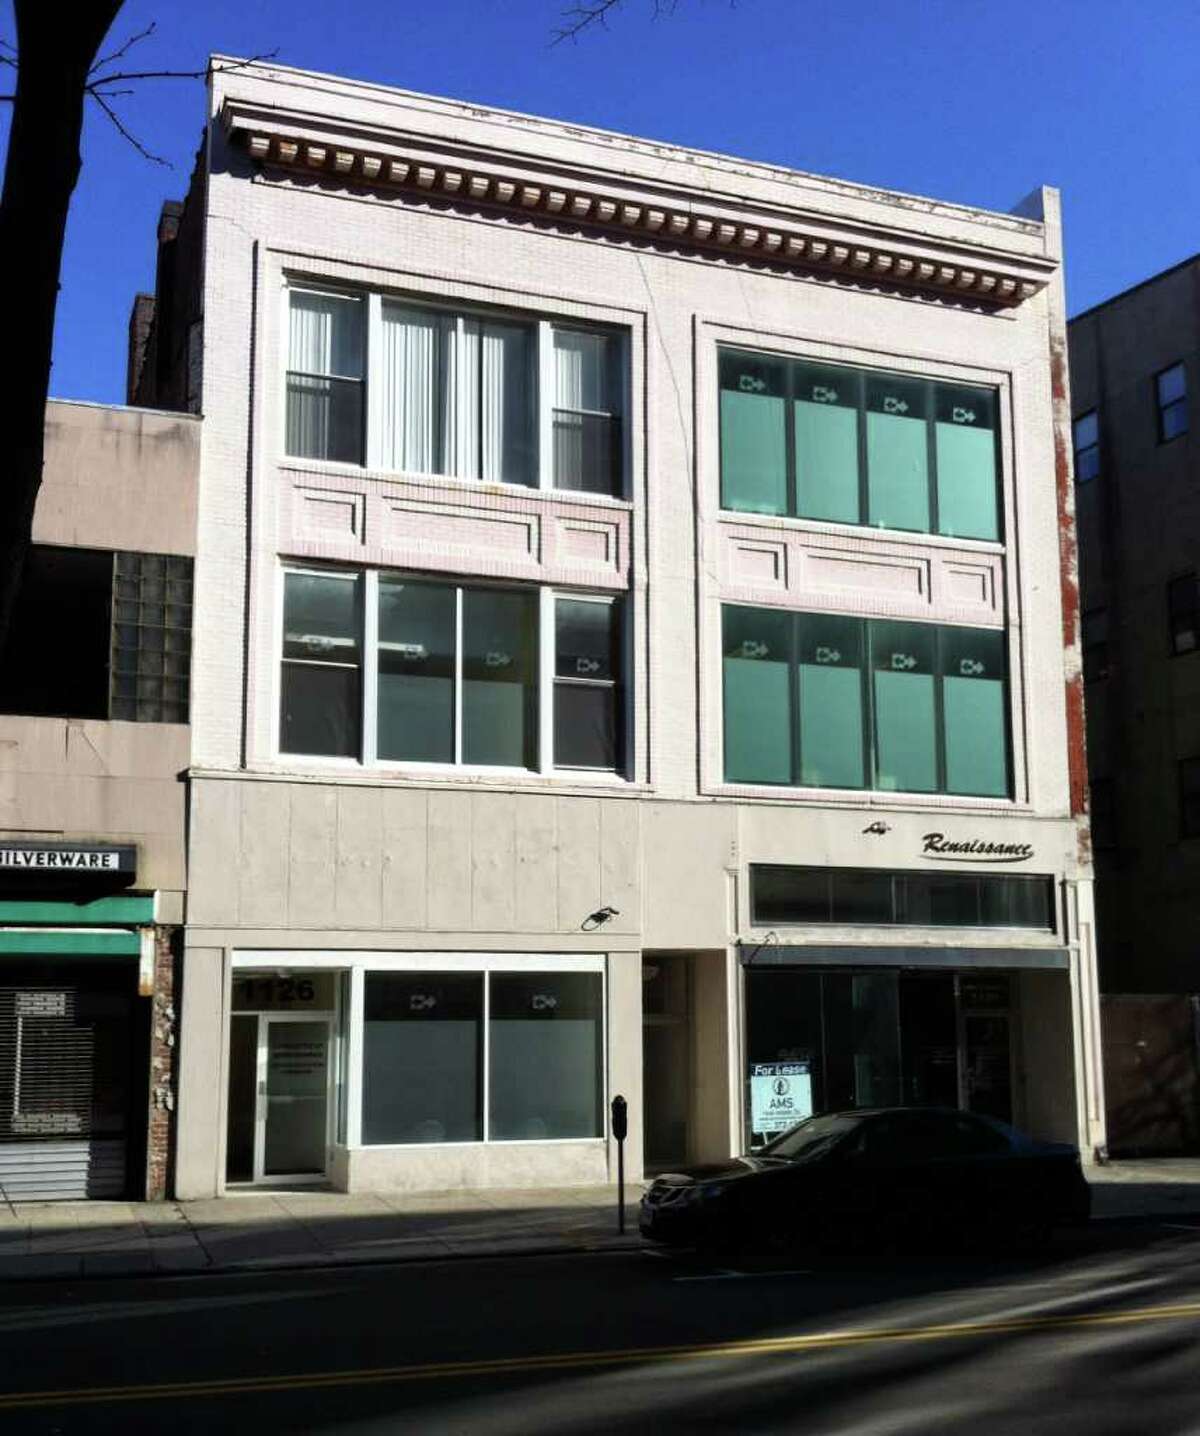 Paul Leka's recording studio was in this building on Main Street in downtown Bridgeport. It was situated on the right side of the building as viewed from the street, on the second floor. Artists would enter through the center door.